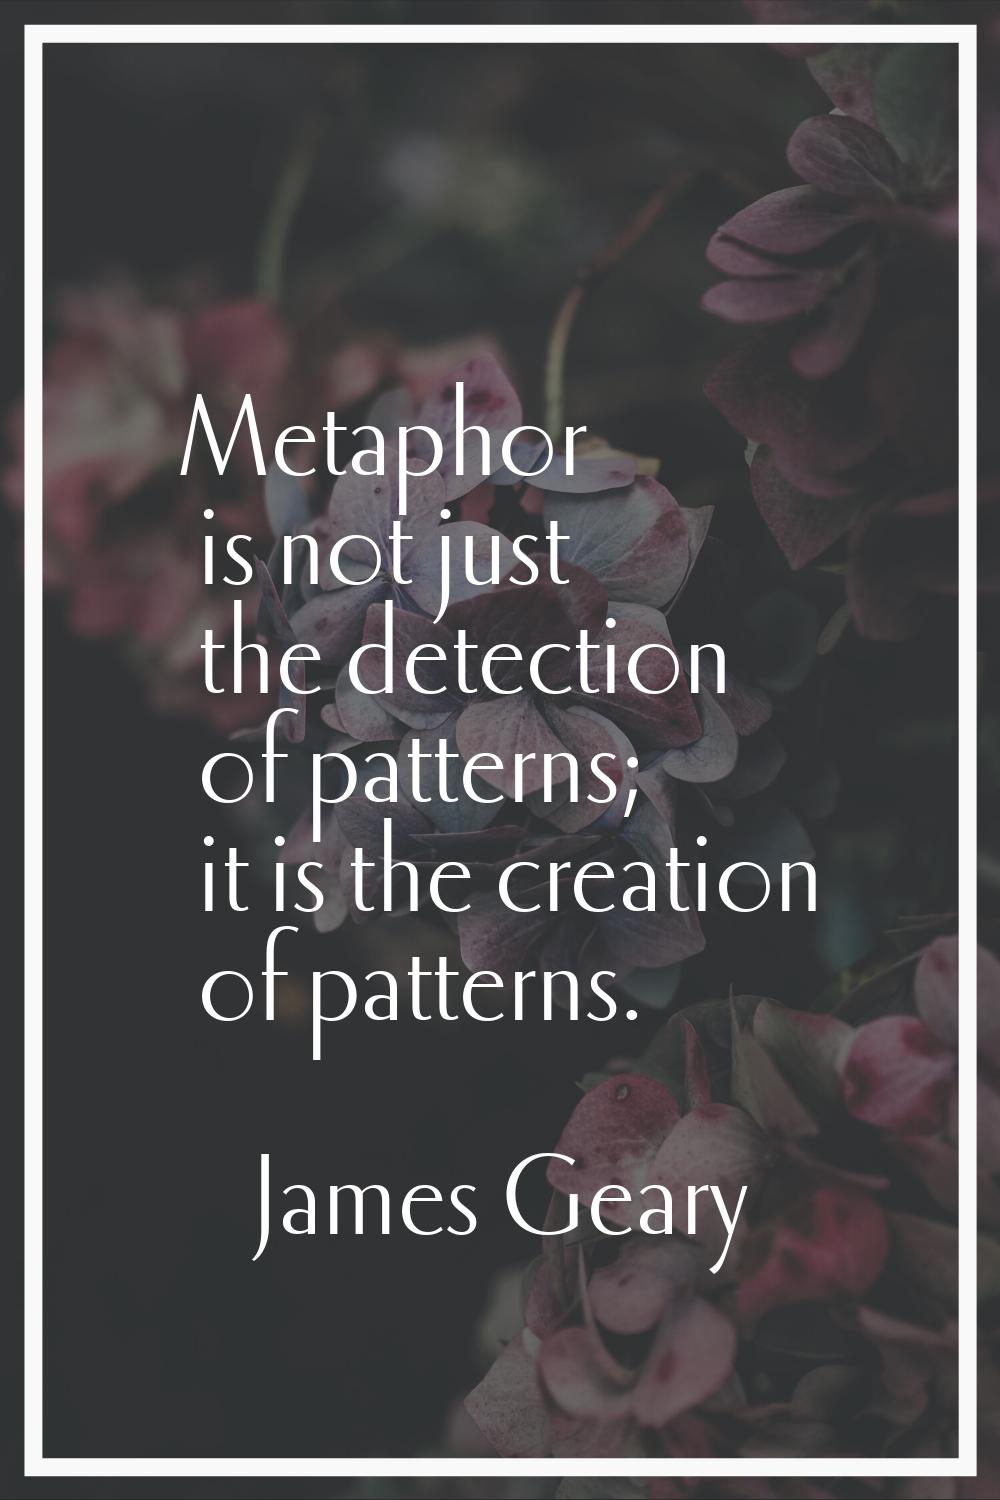 Metaphor is not just the detection of patterns; it is the creation of patterns.